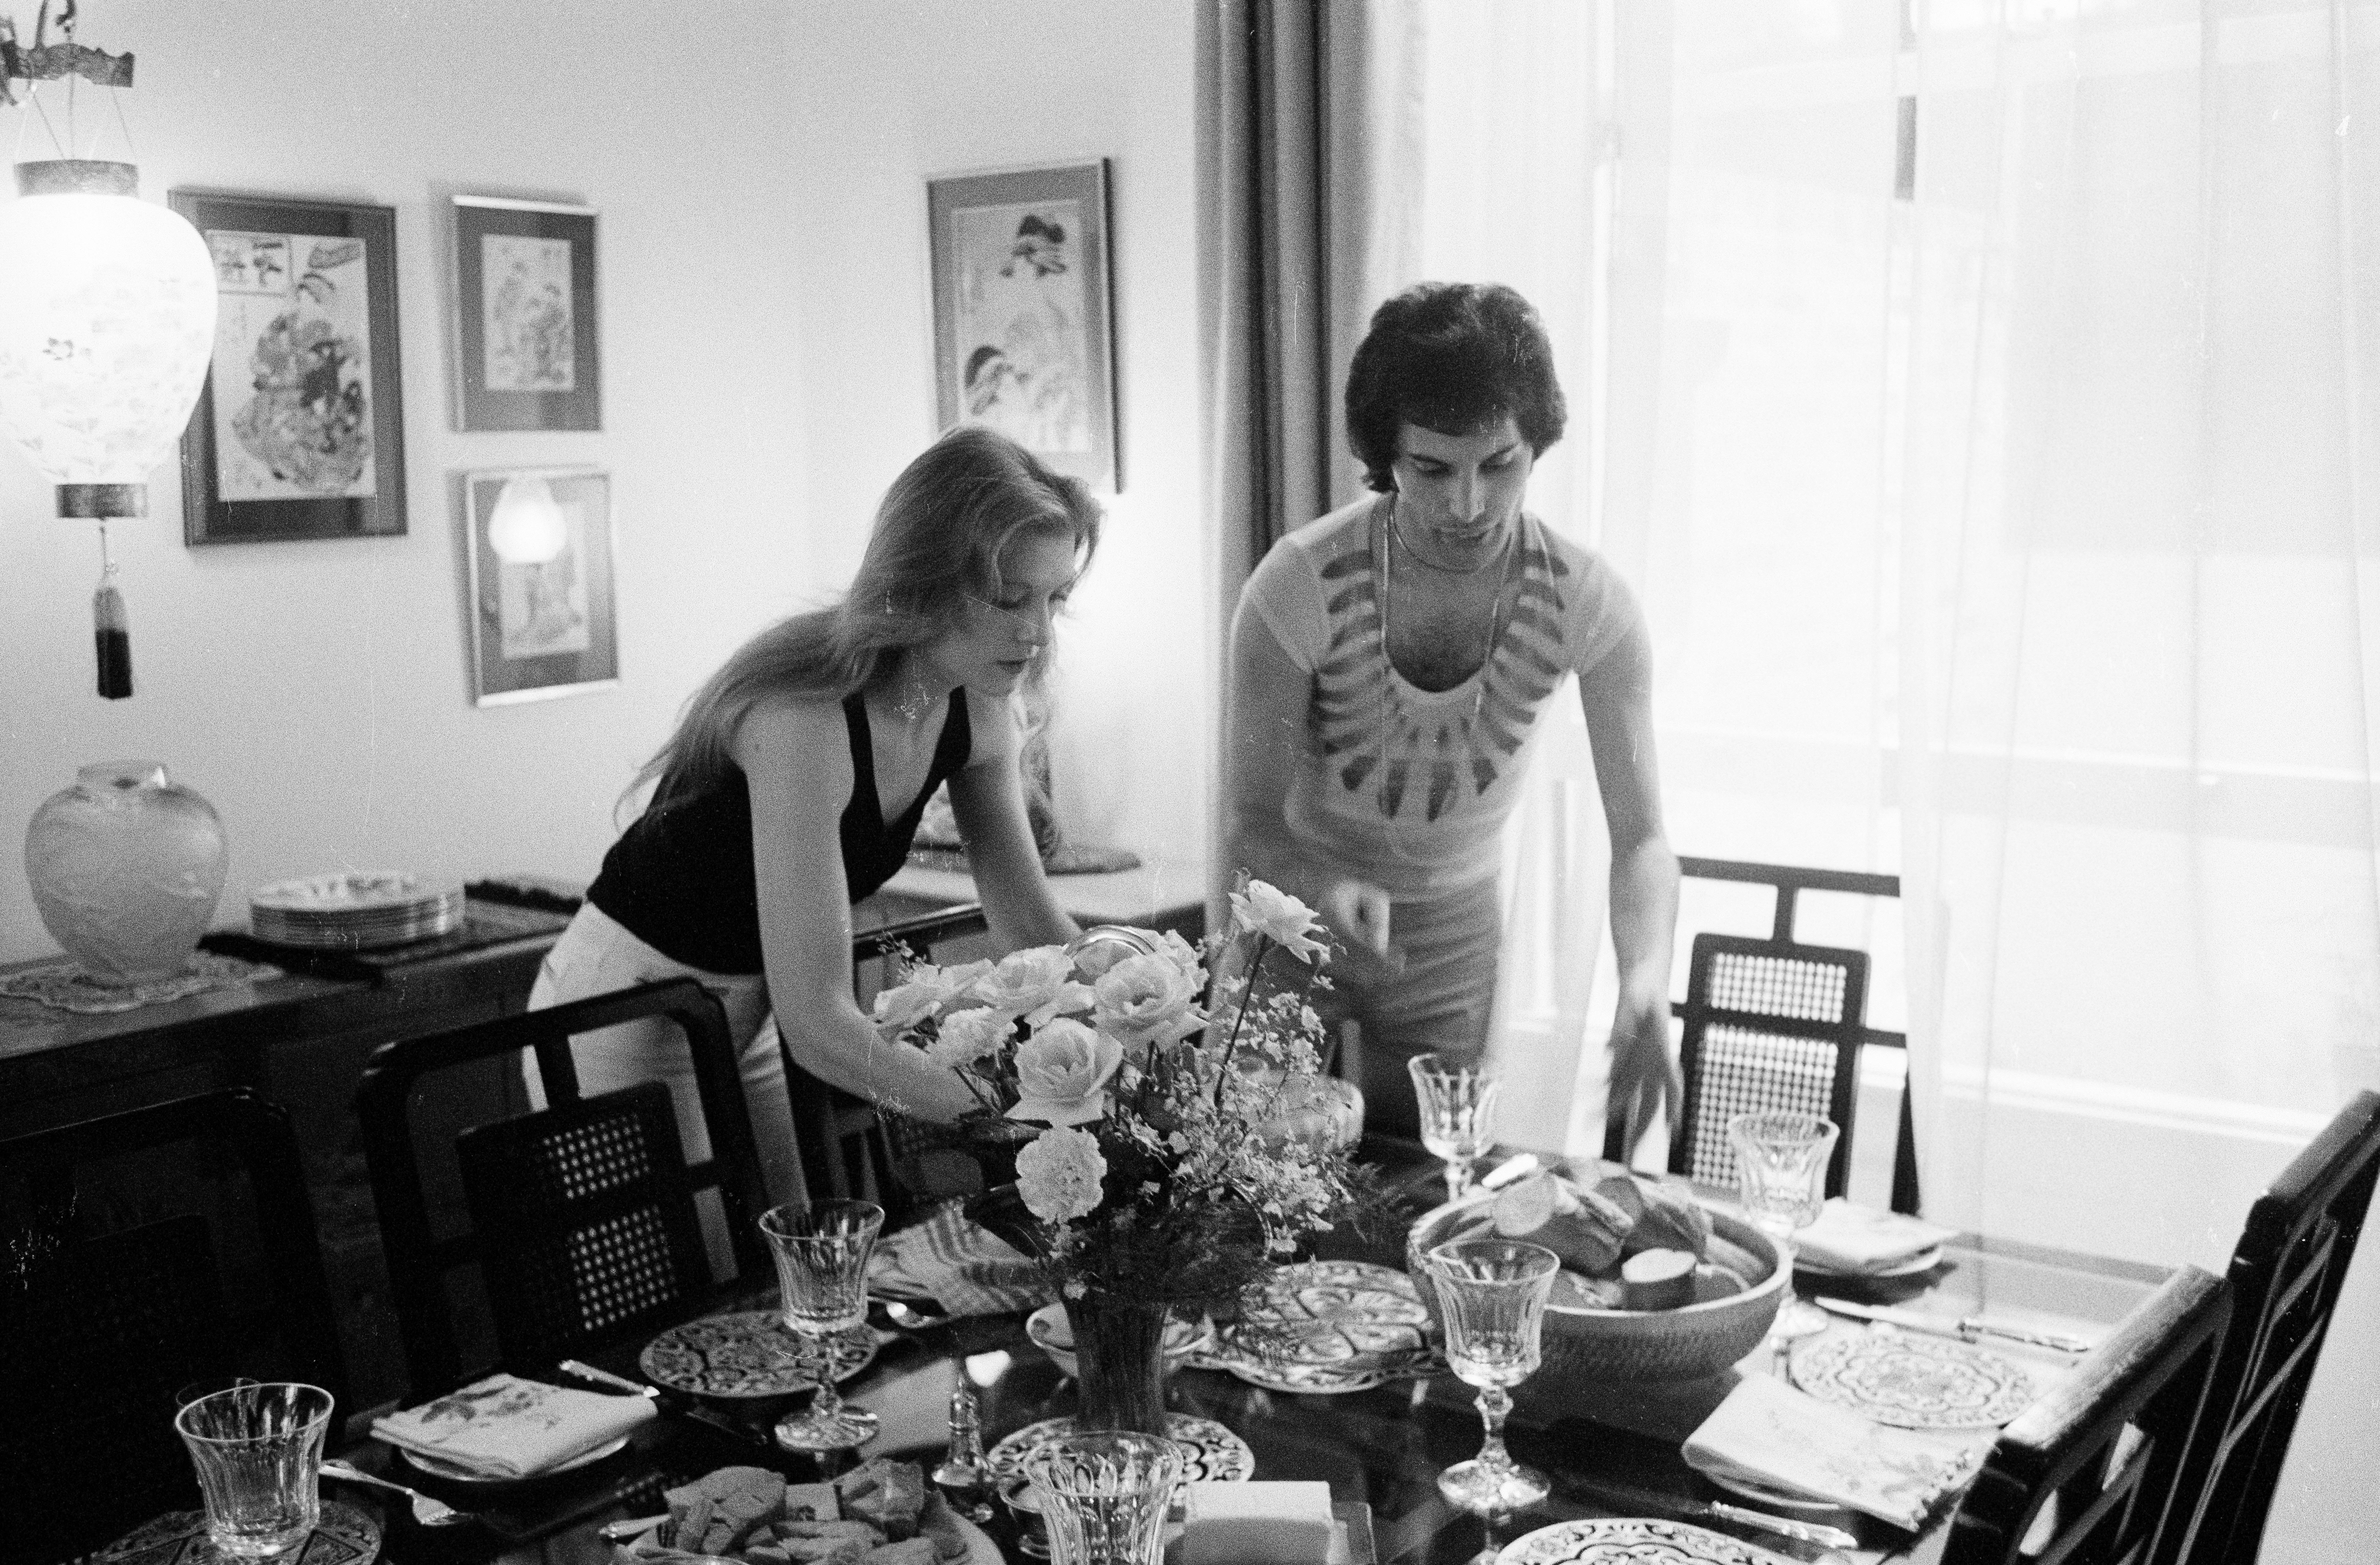 Mary and Freddie were still close in 1977, a year after their split